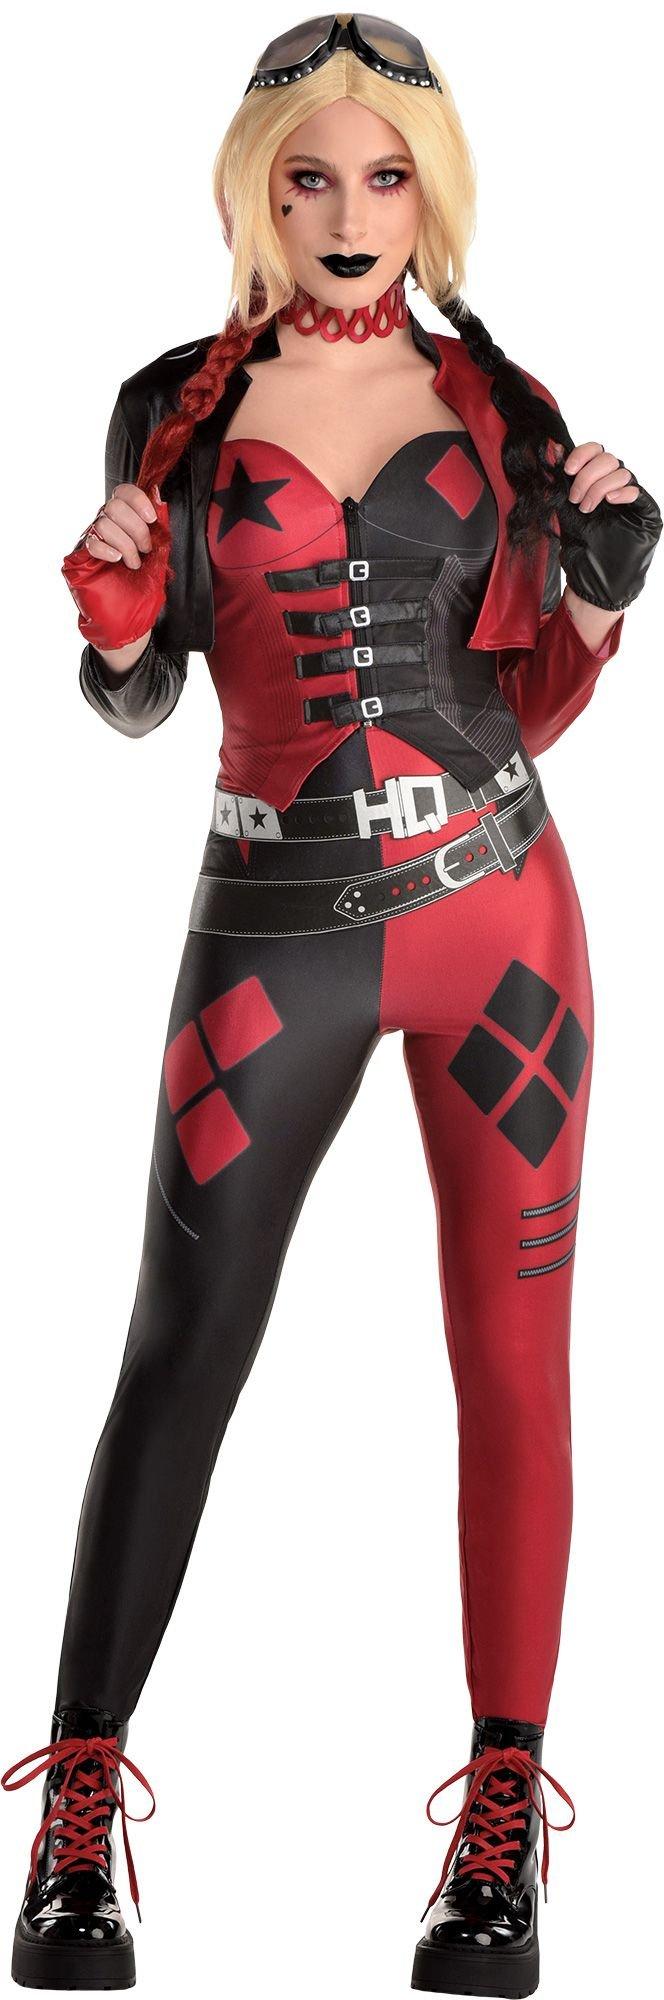 Adult Harley Quinn Deluxe Costume - Suicide Squad 2